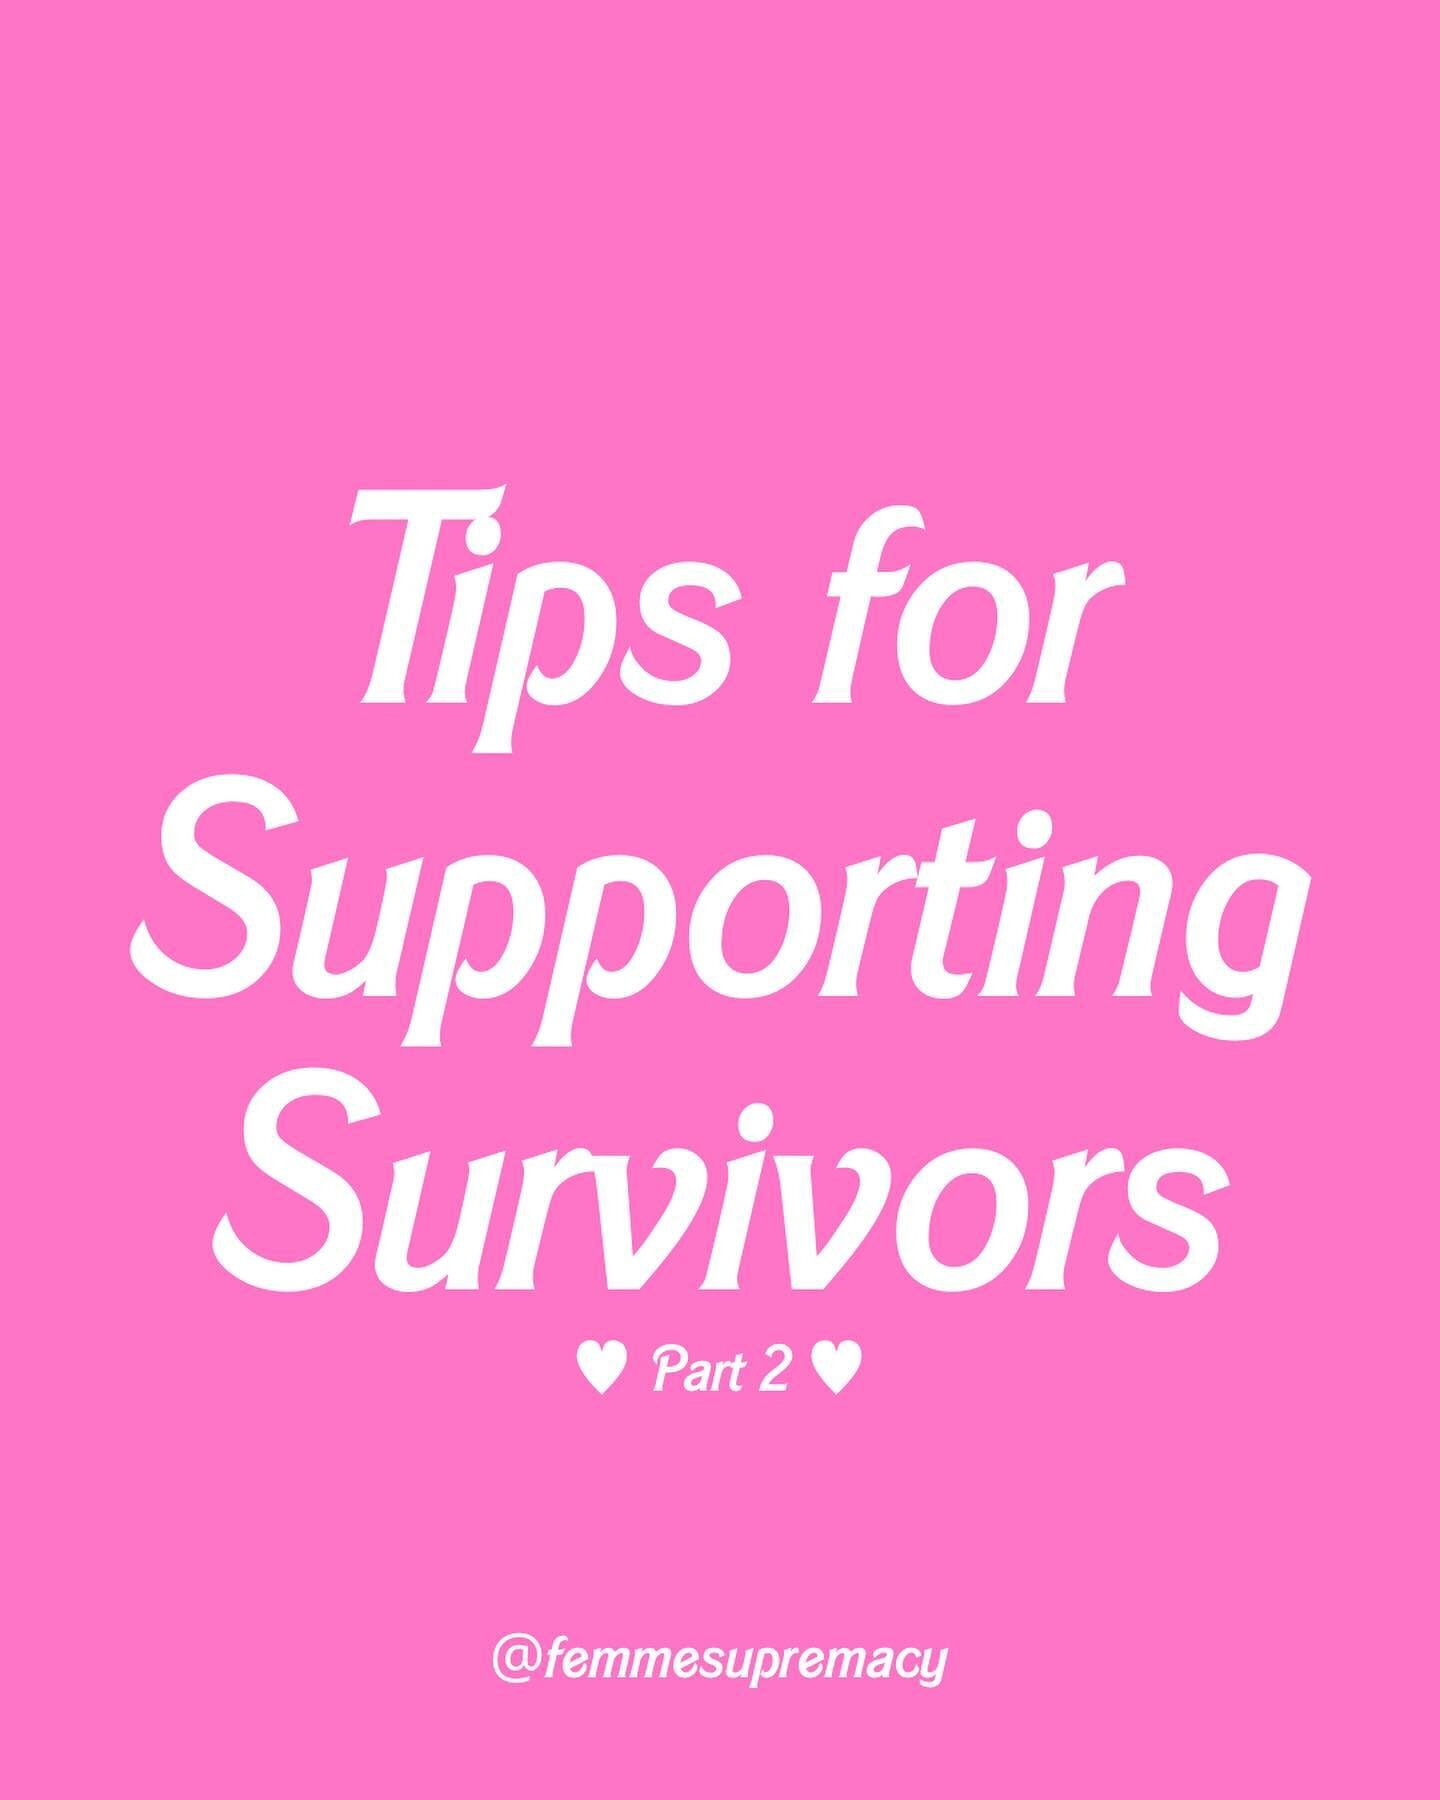 Tips for supporting survivors 💕 

🩷 Believe us. This is the bare minimum and should be should be the starting point of support, rather than the end of it.

🧡 Don&rsquo;t assume what we need; ask us! Many of us may not know what we need or what to 